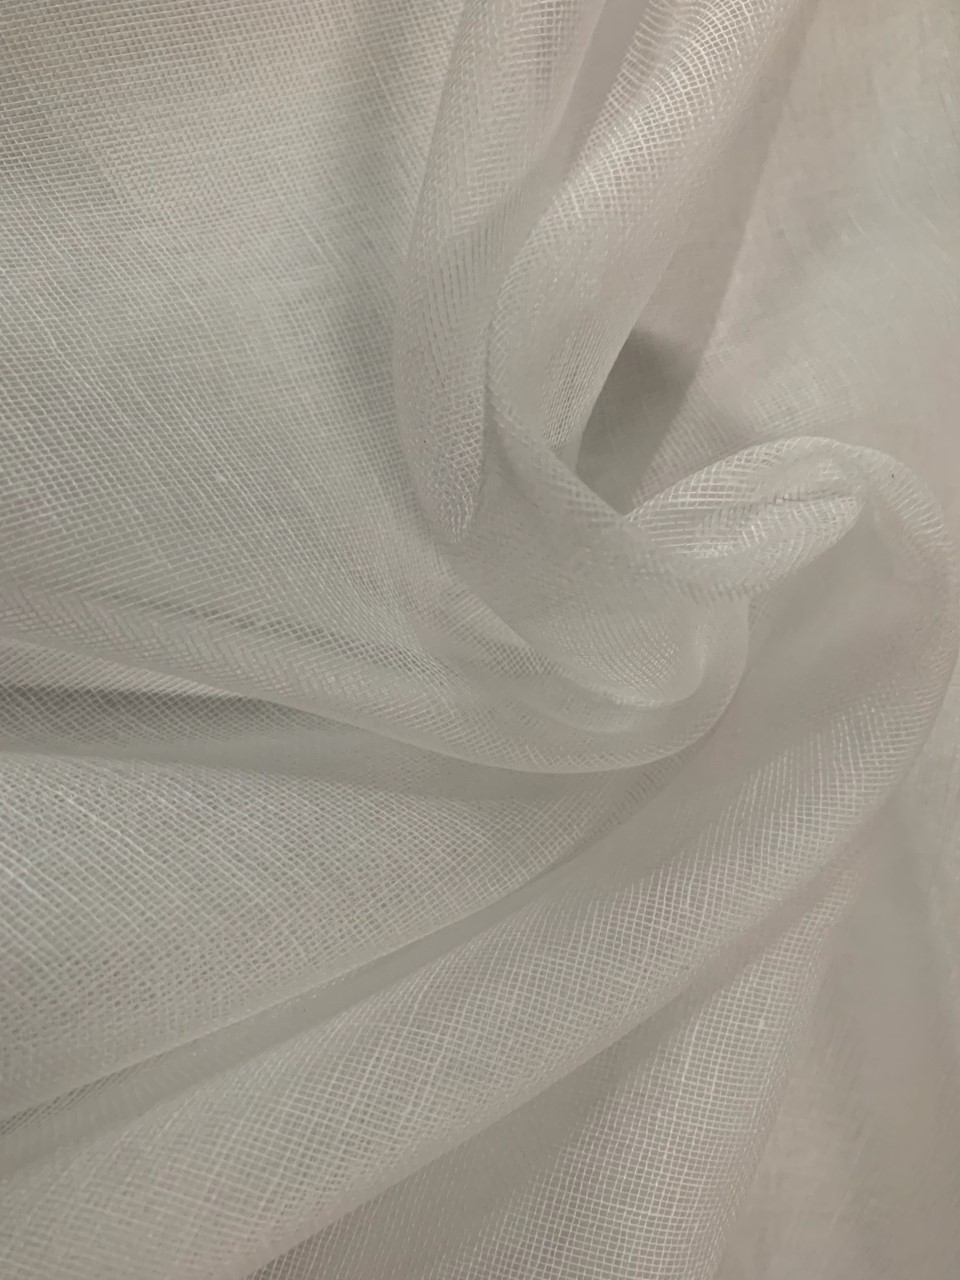 Grade 60 Cheesecloth 100 Yard Roll 36" Wide (Bleached) - Click Image to Close